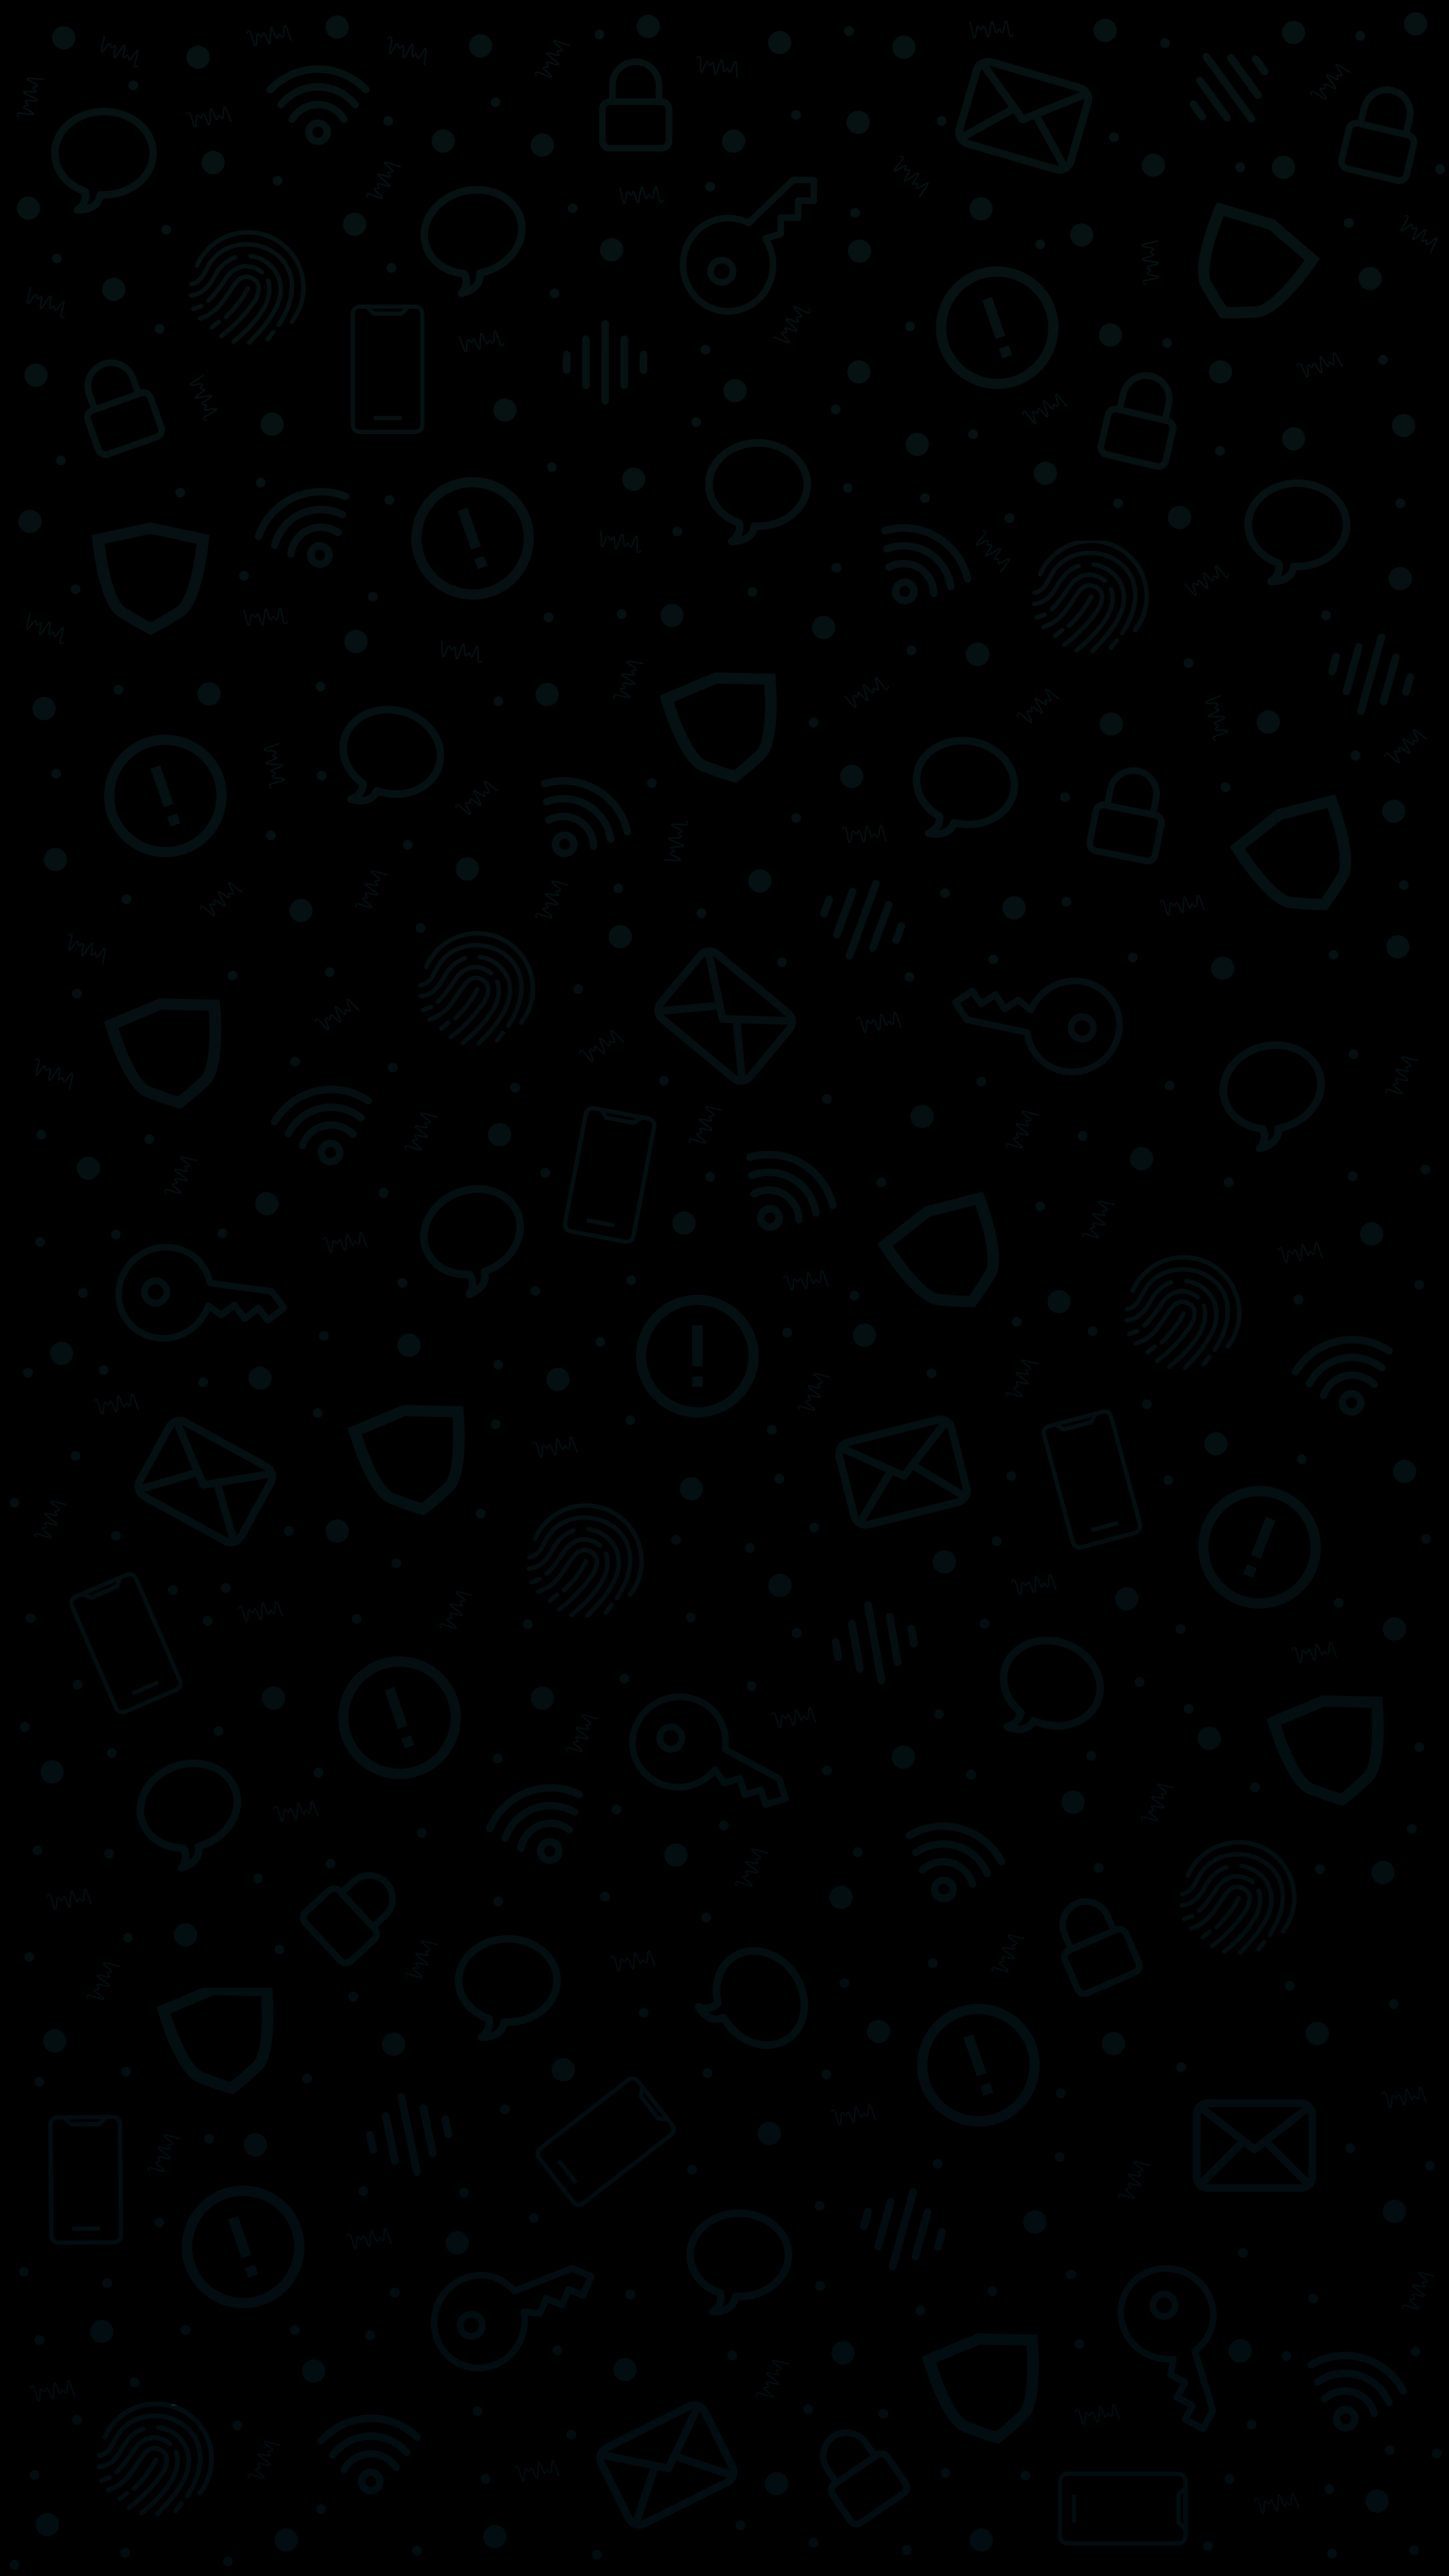 teal icon background 15%